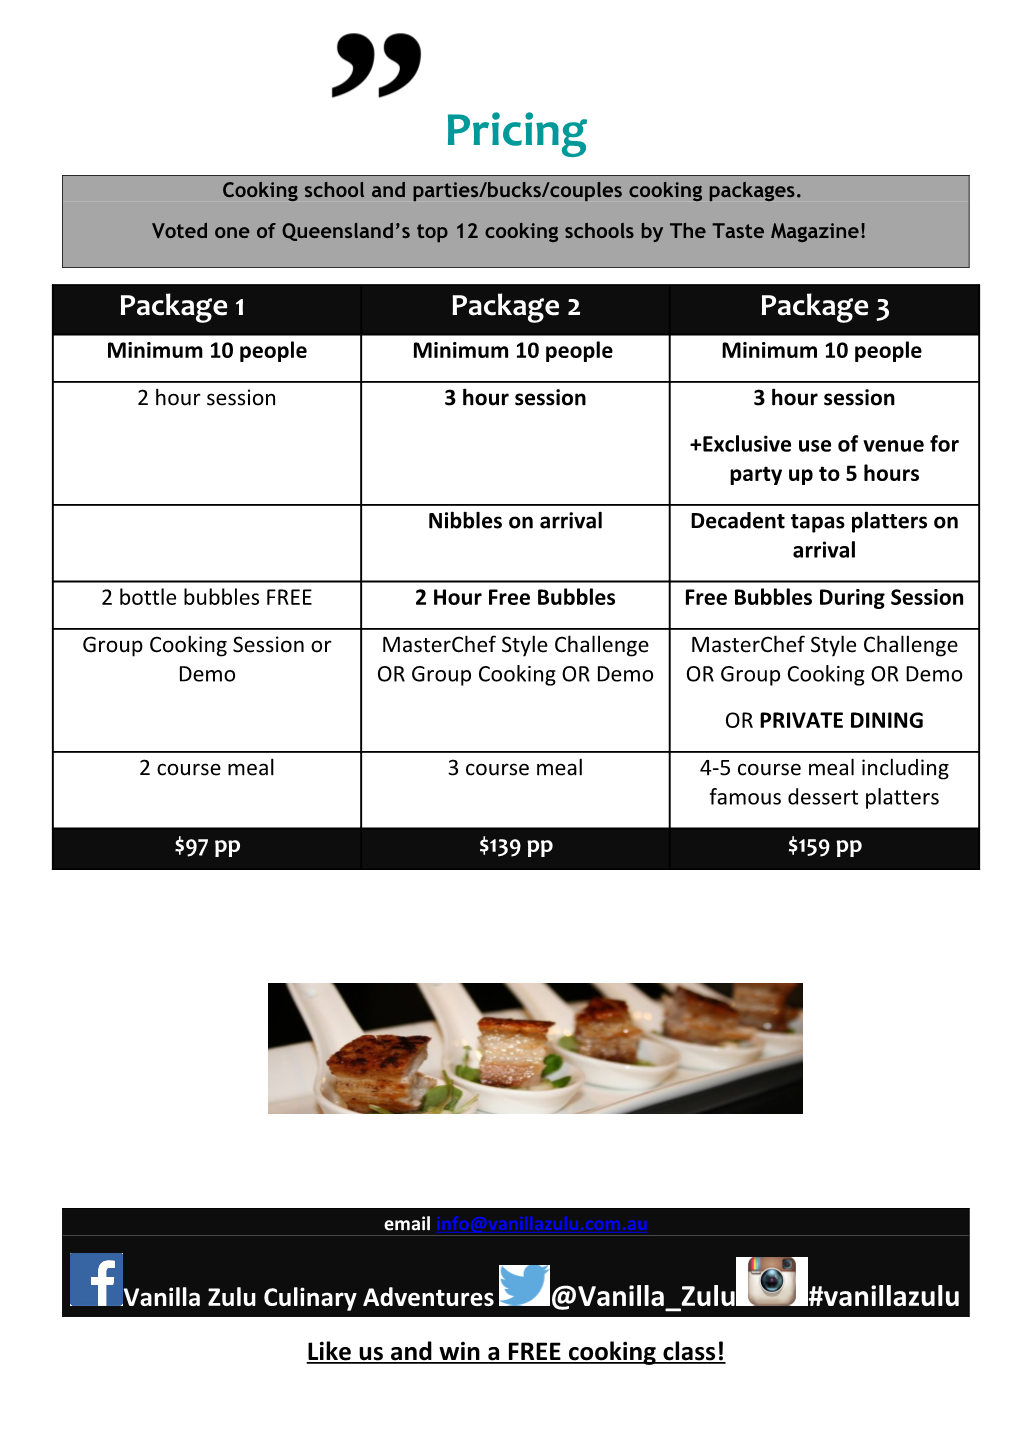 Cooking School and Parties/Bucks/Couples Cooking Packages